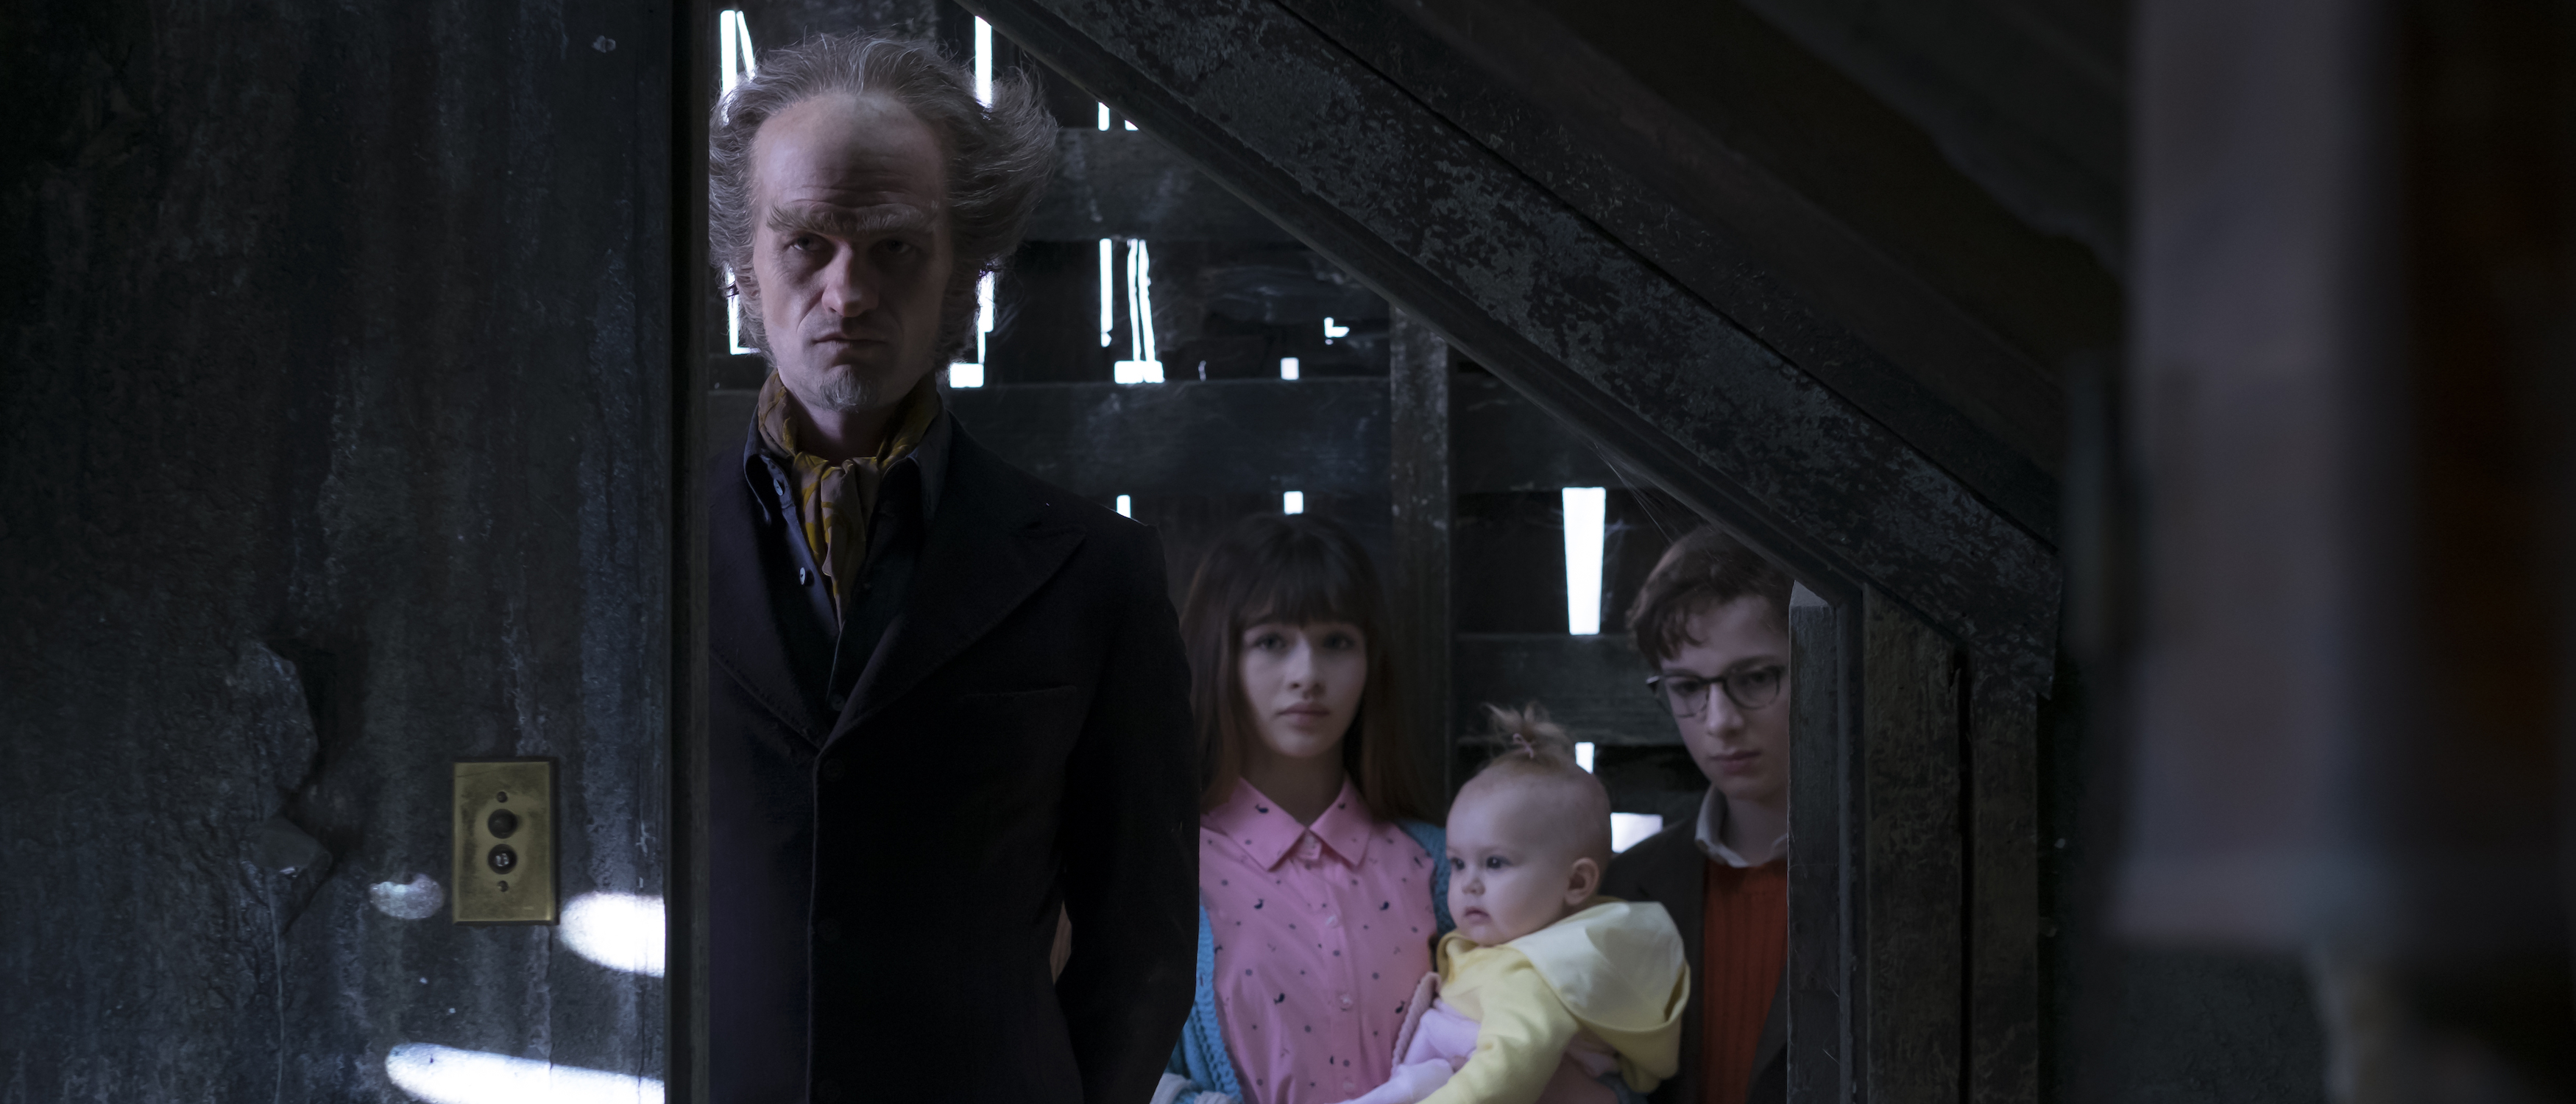 A Series of Unfortunate Events Season 3 Confirmed